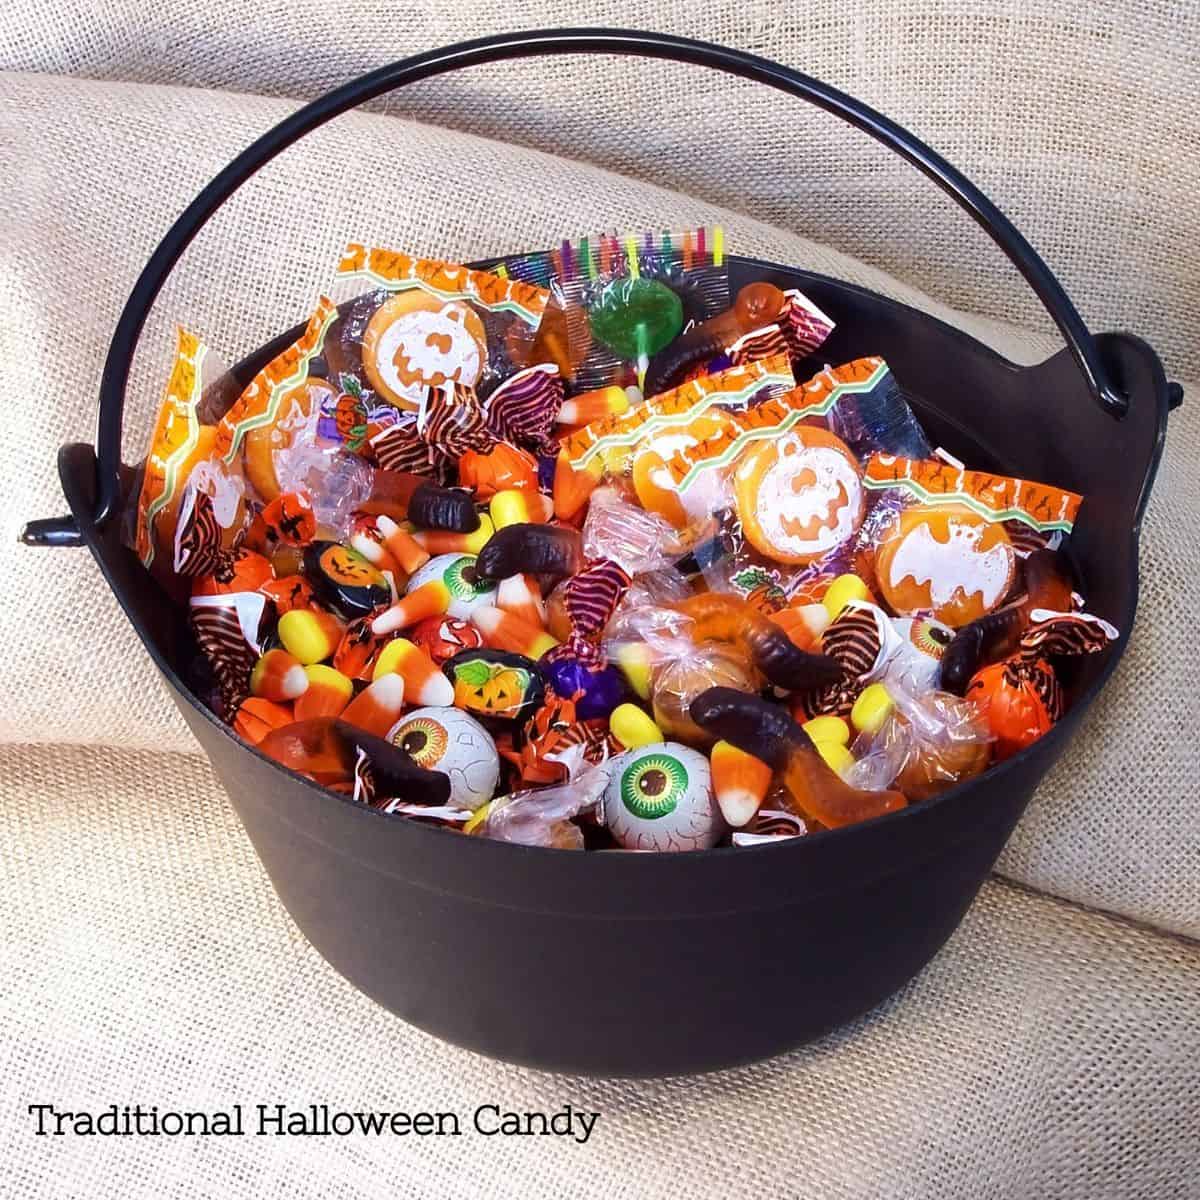 A black bucket of traditional Halloween candy.